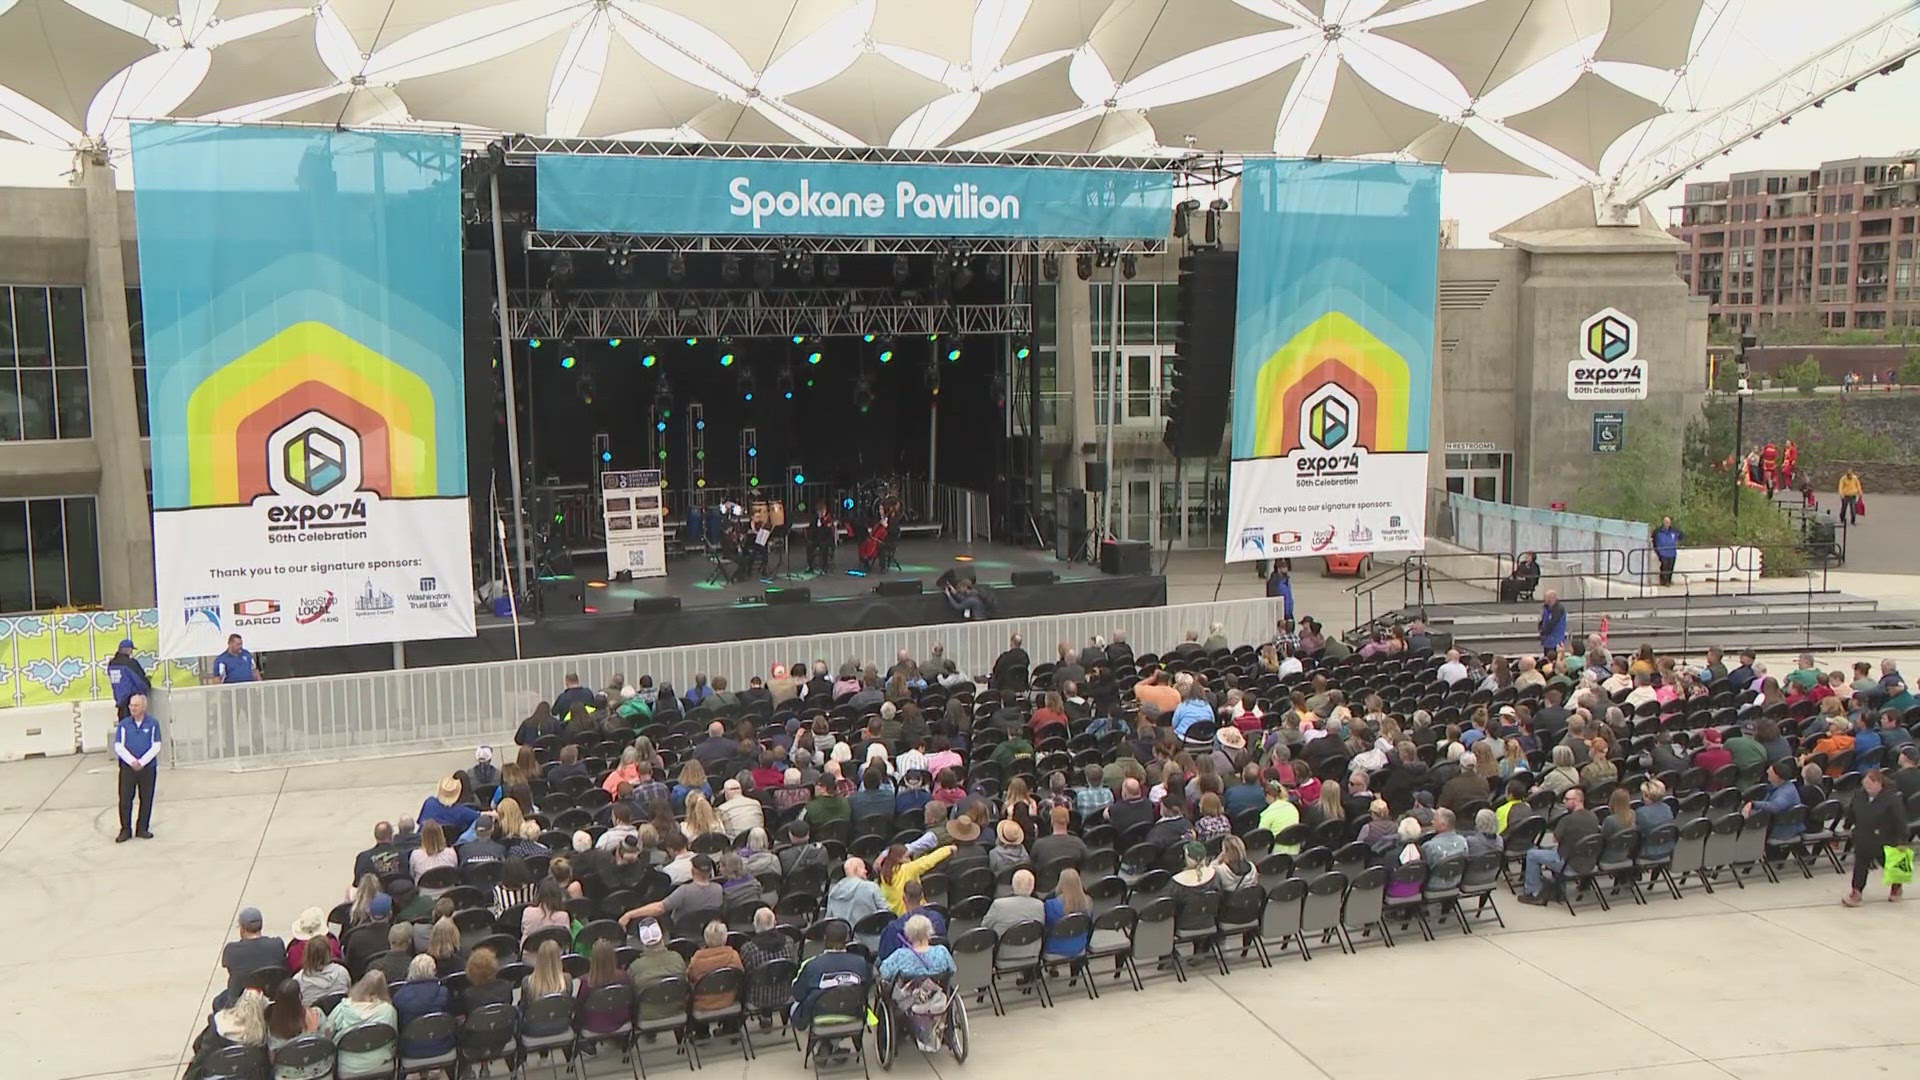 Spokane celebrated the start of its Expo '74 anniversary celebration on Saturday with performances, vendors, and a drone show.